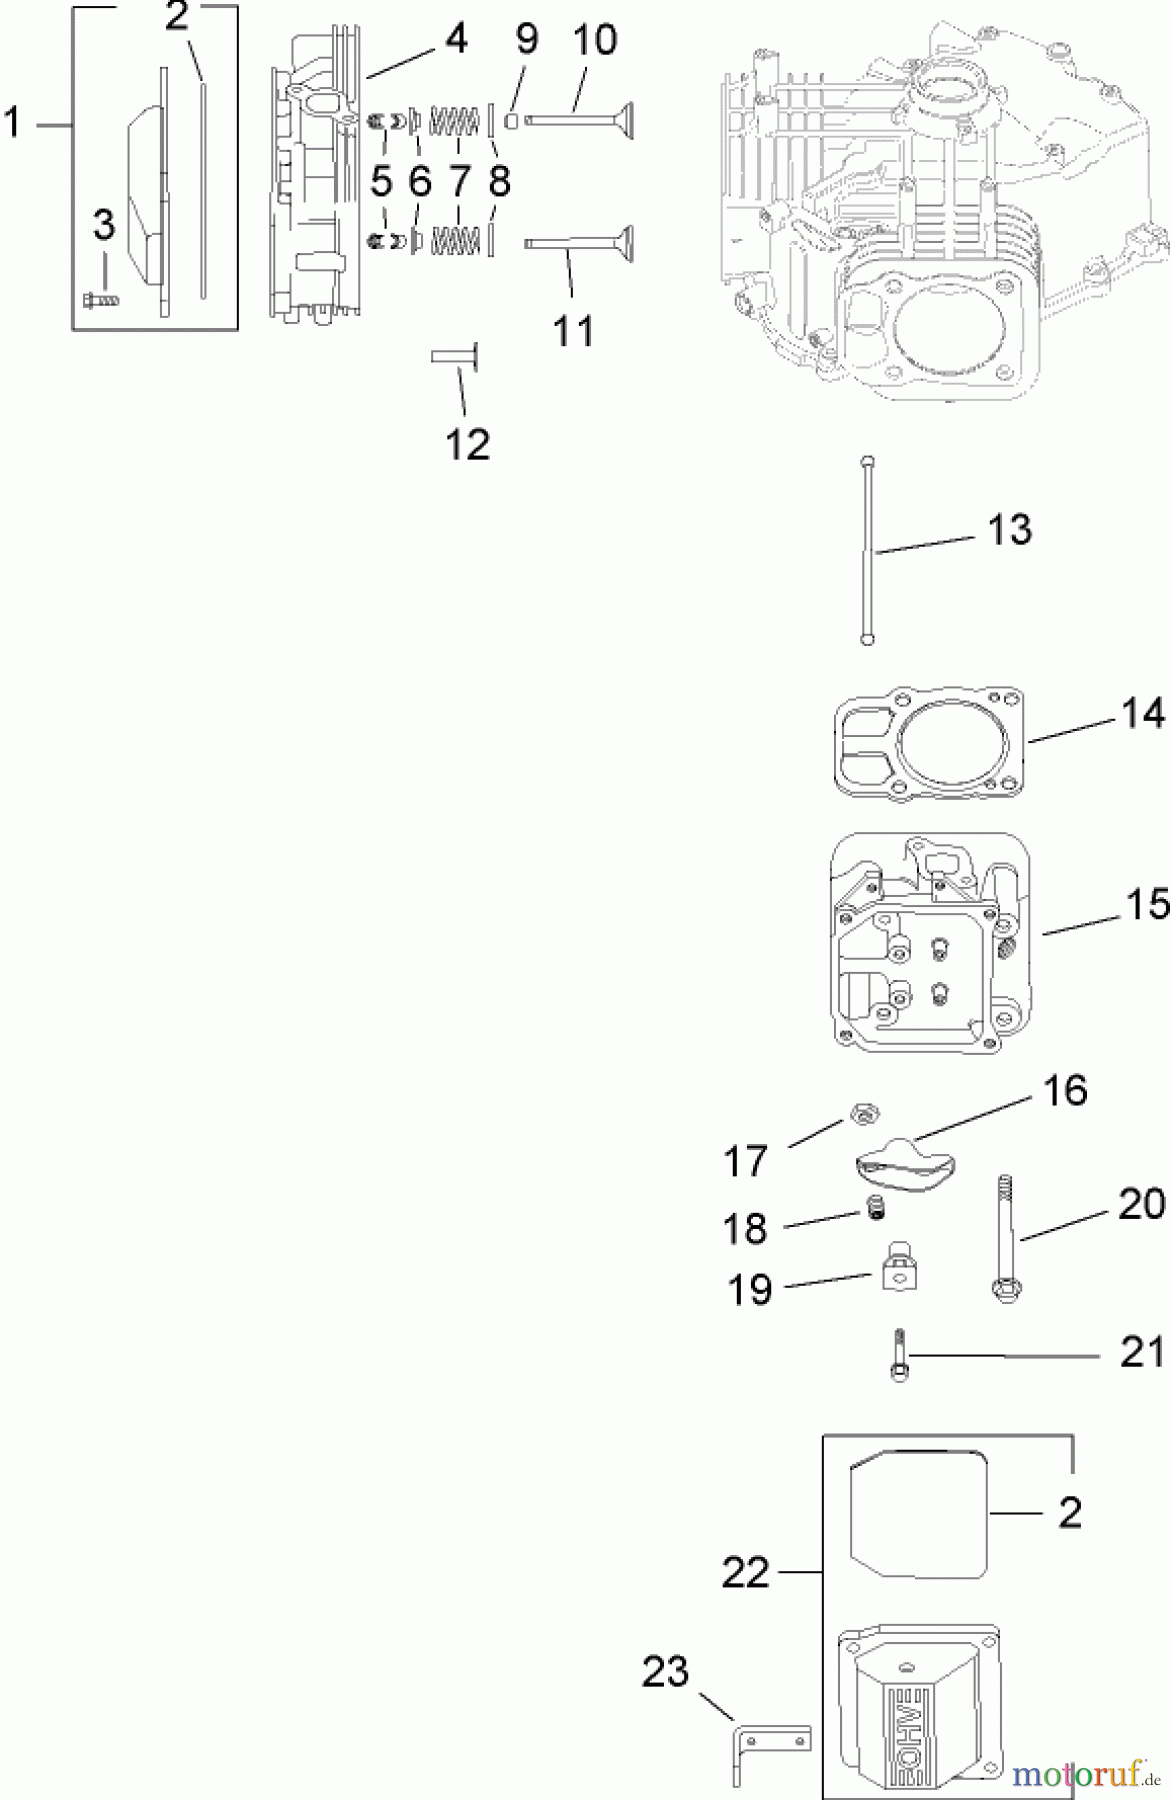  Toro Neu Mowers, Lawn & Garden Tractor Seite 1 13AP60RP544 (LX500) - Toro LX500 Lawn Tractor, 2006 (1A056B50000-) HEAD, VALVE AND BREATHER ASSEMBLY KOHLER SV720-0011